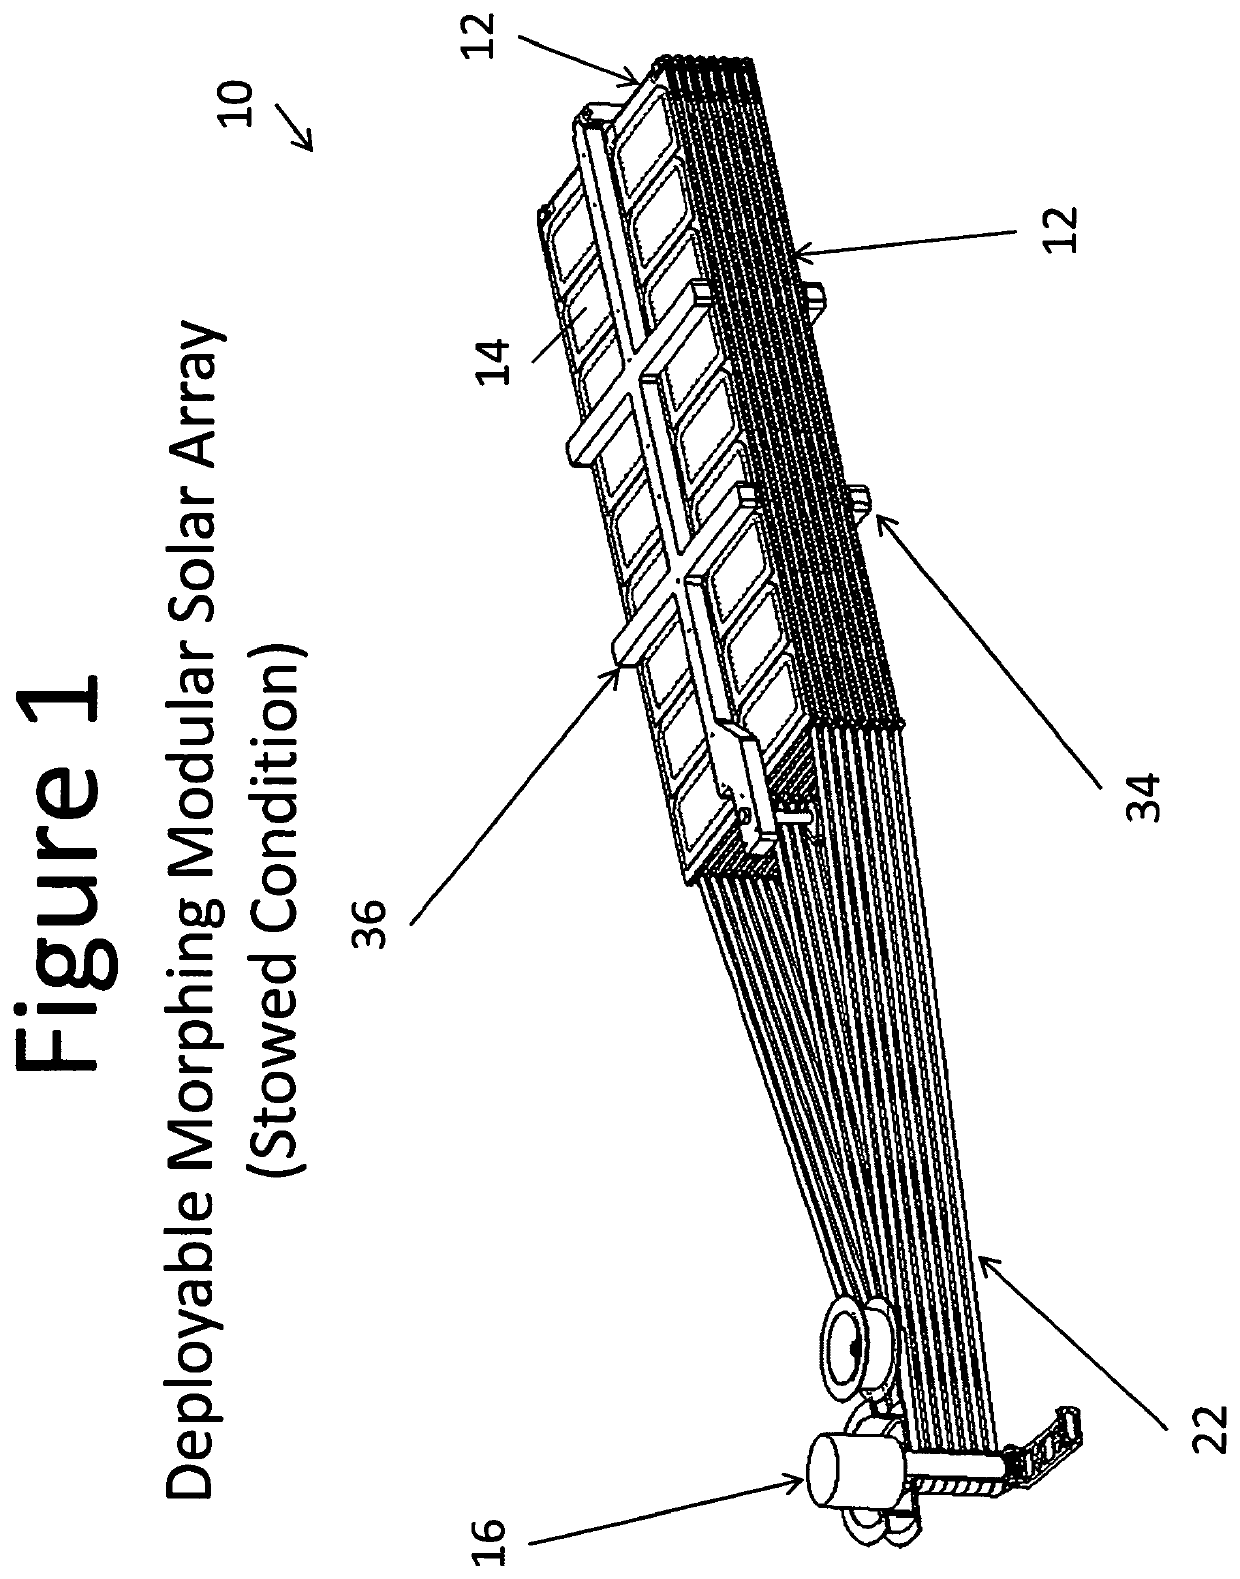 Panel for use in a deployable and cantilevered solar array structure